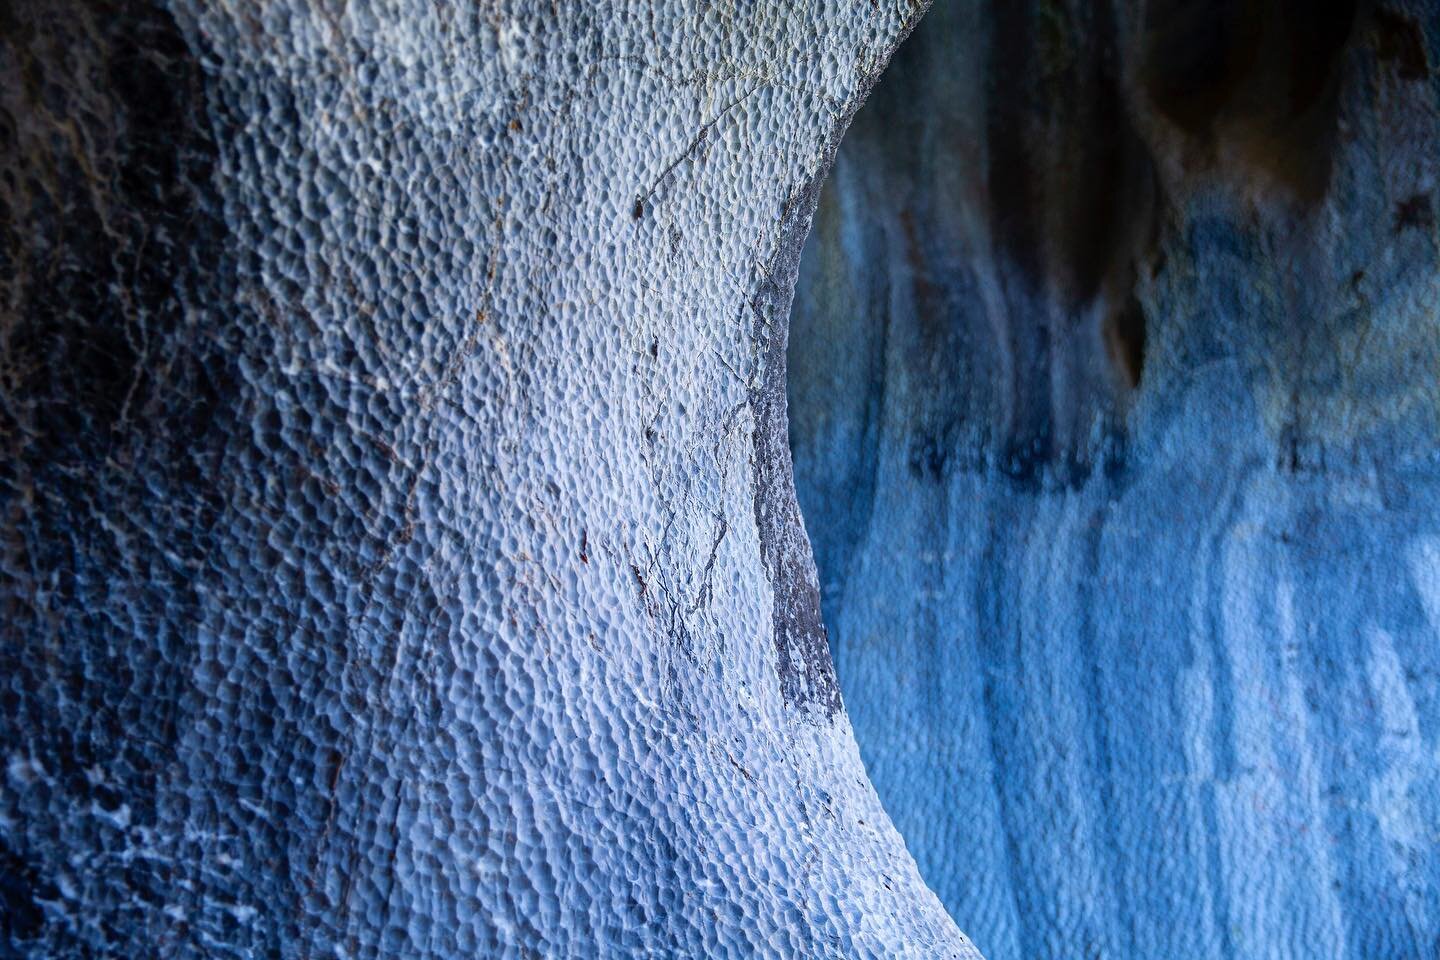 The Marble caves in General Lake Carrera are unique. I was astounded by the incredible textures and patterns of the caves. The shape and the texture of this part of the cave was so beautiful, I love the curve and the depth and the contrasts of blue. 